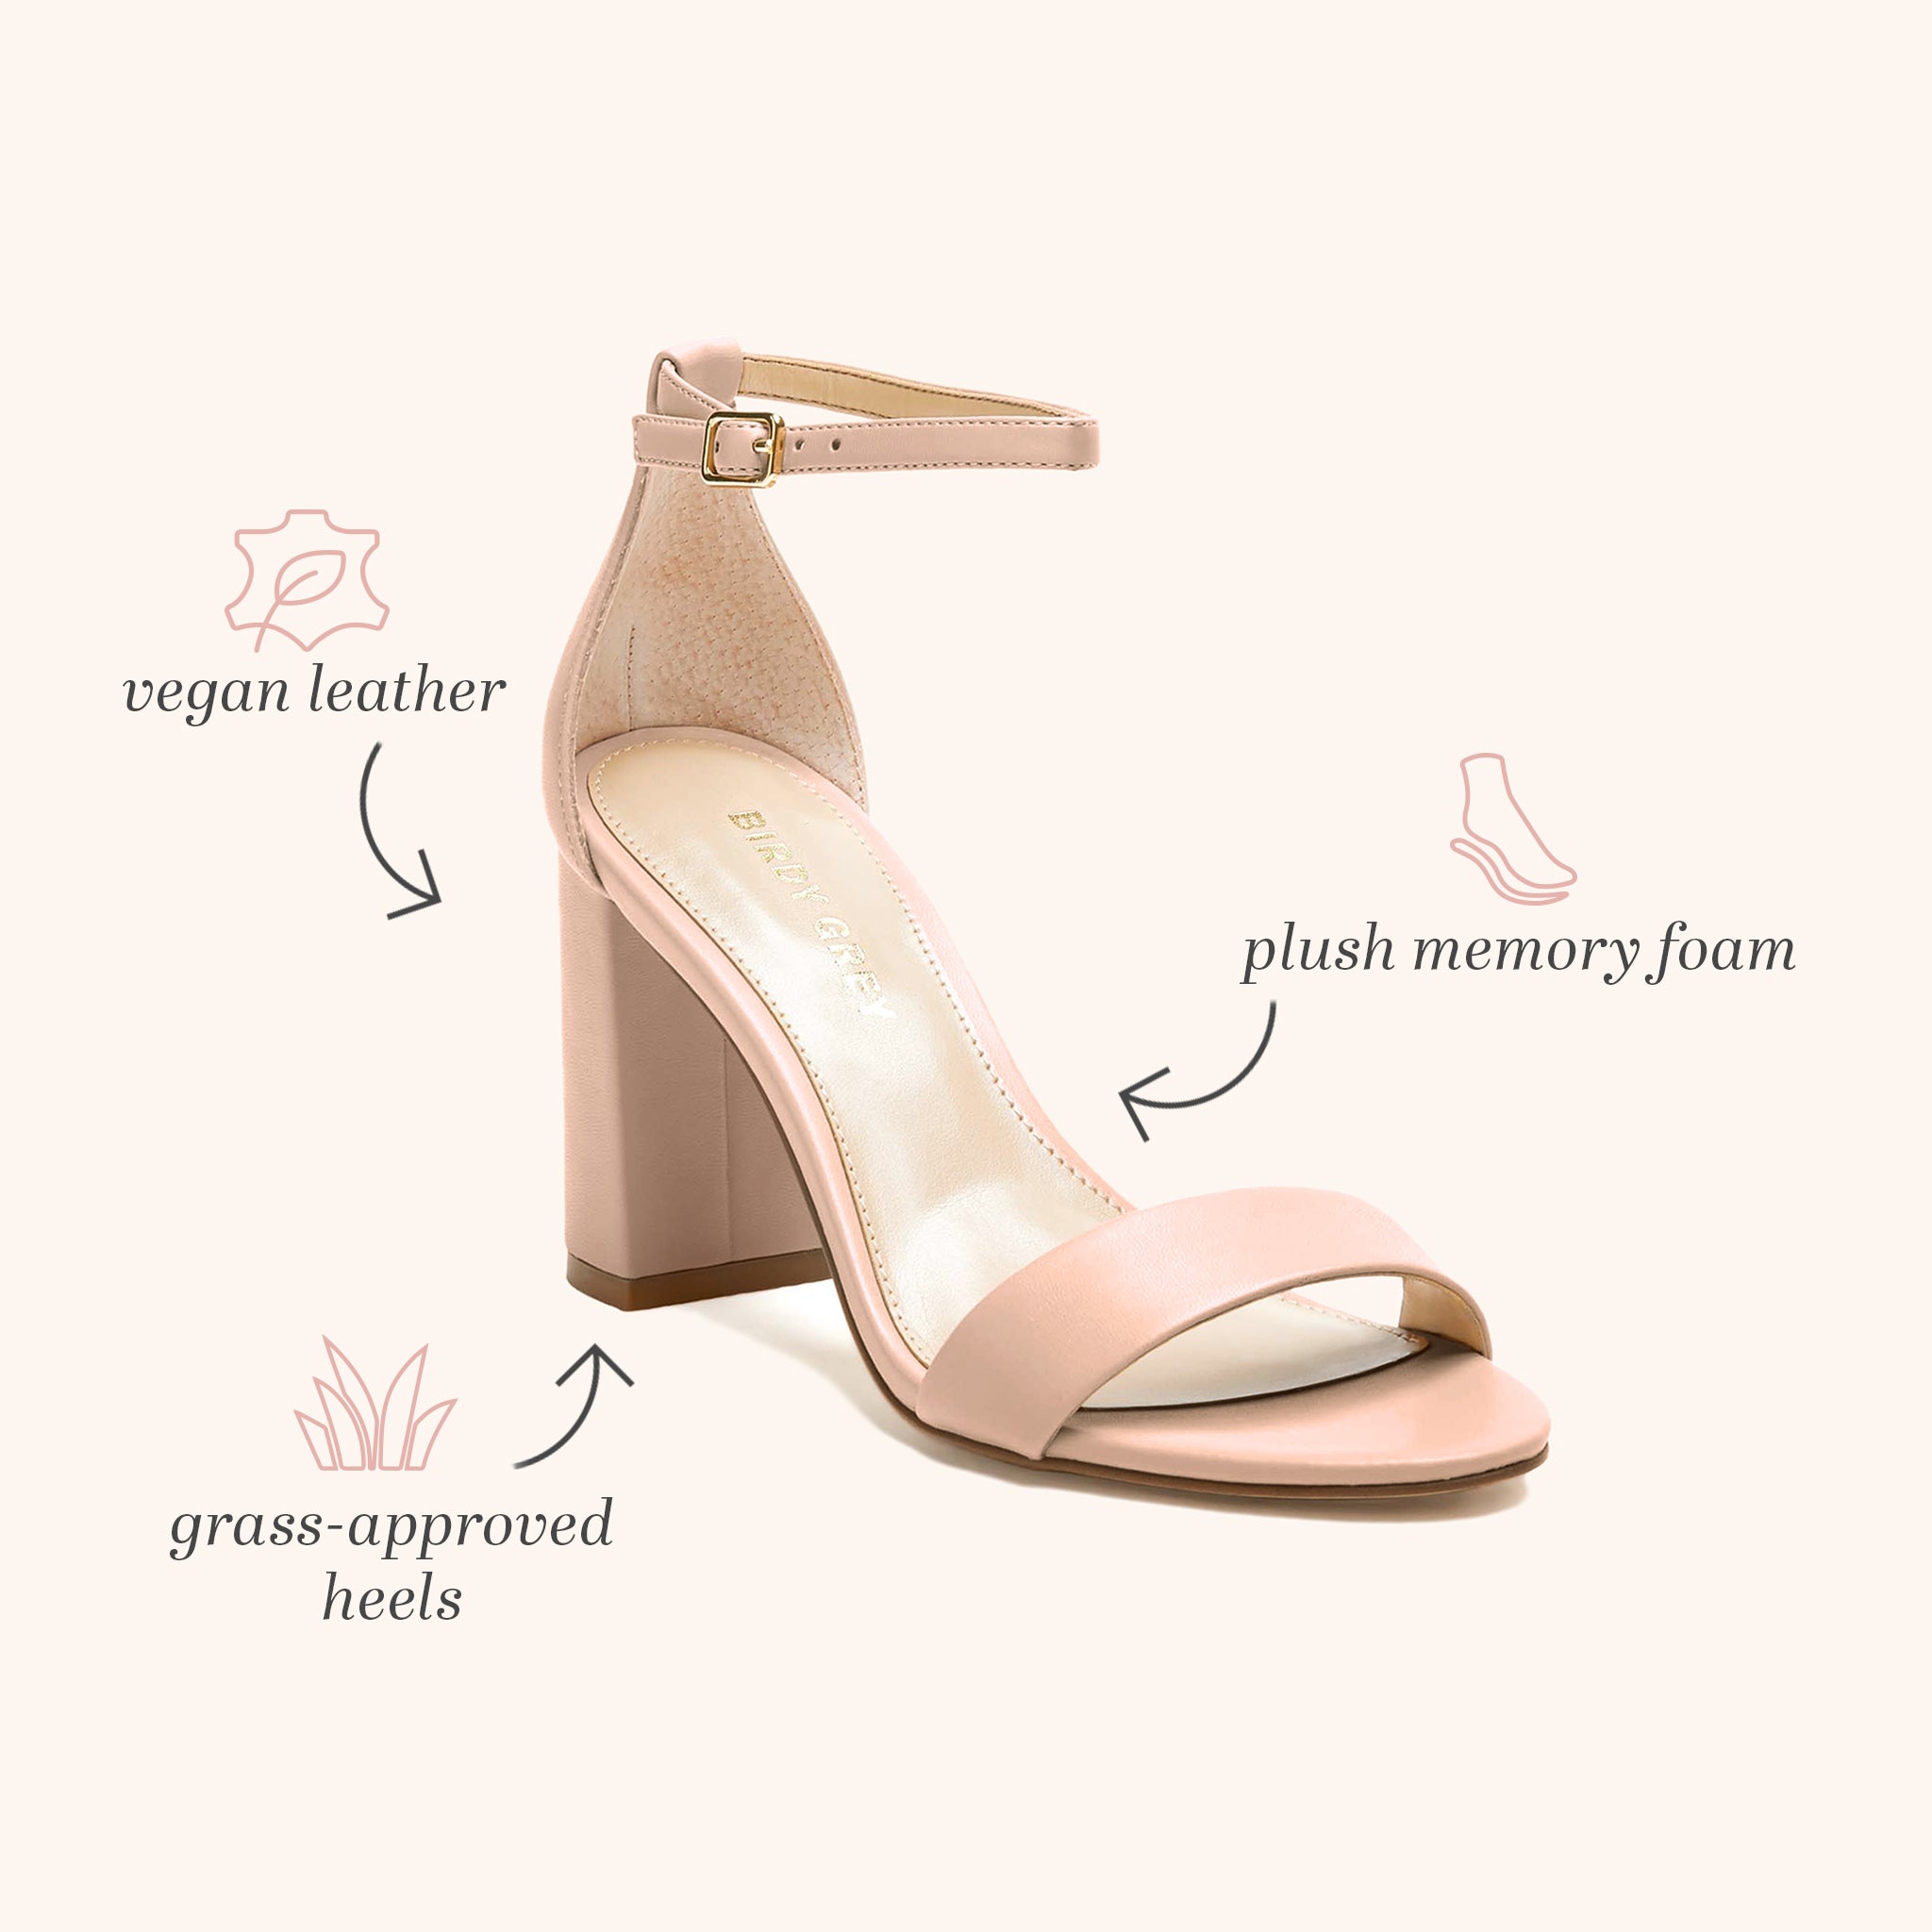 Front view of the Mary High Chunky Heel shoe in nude blush in vegan leather with arrows and labels pointing to shoe features. An arrow pointing to the shoe is labeled 